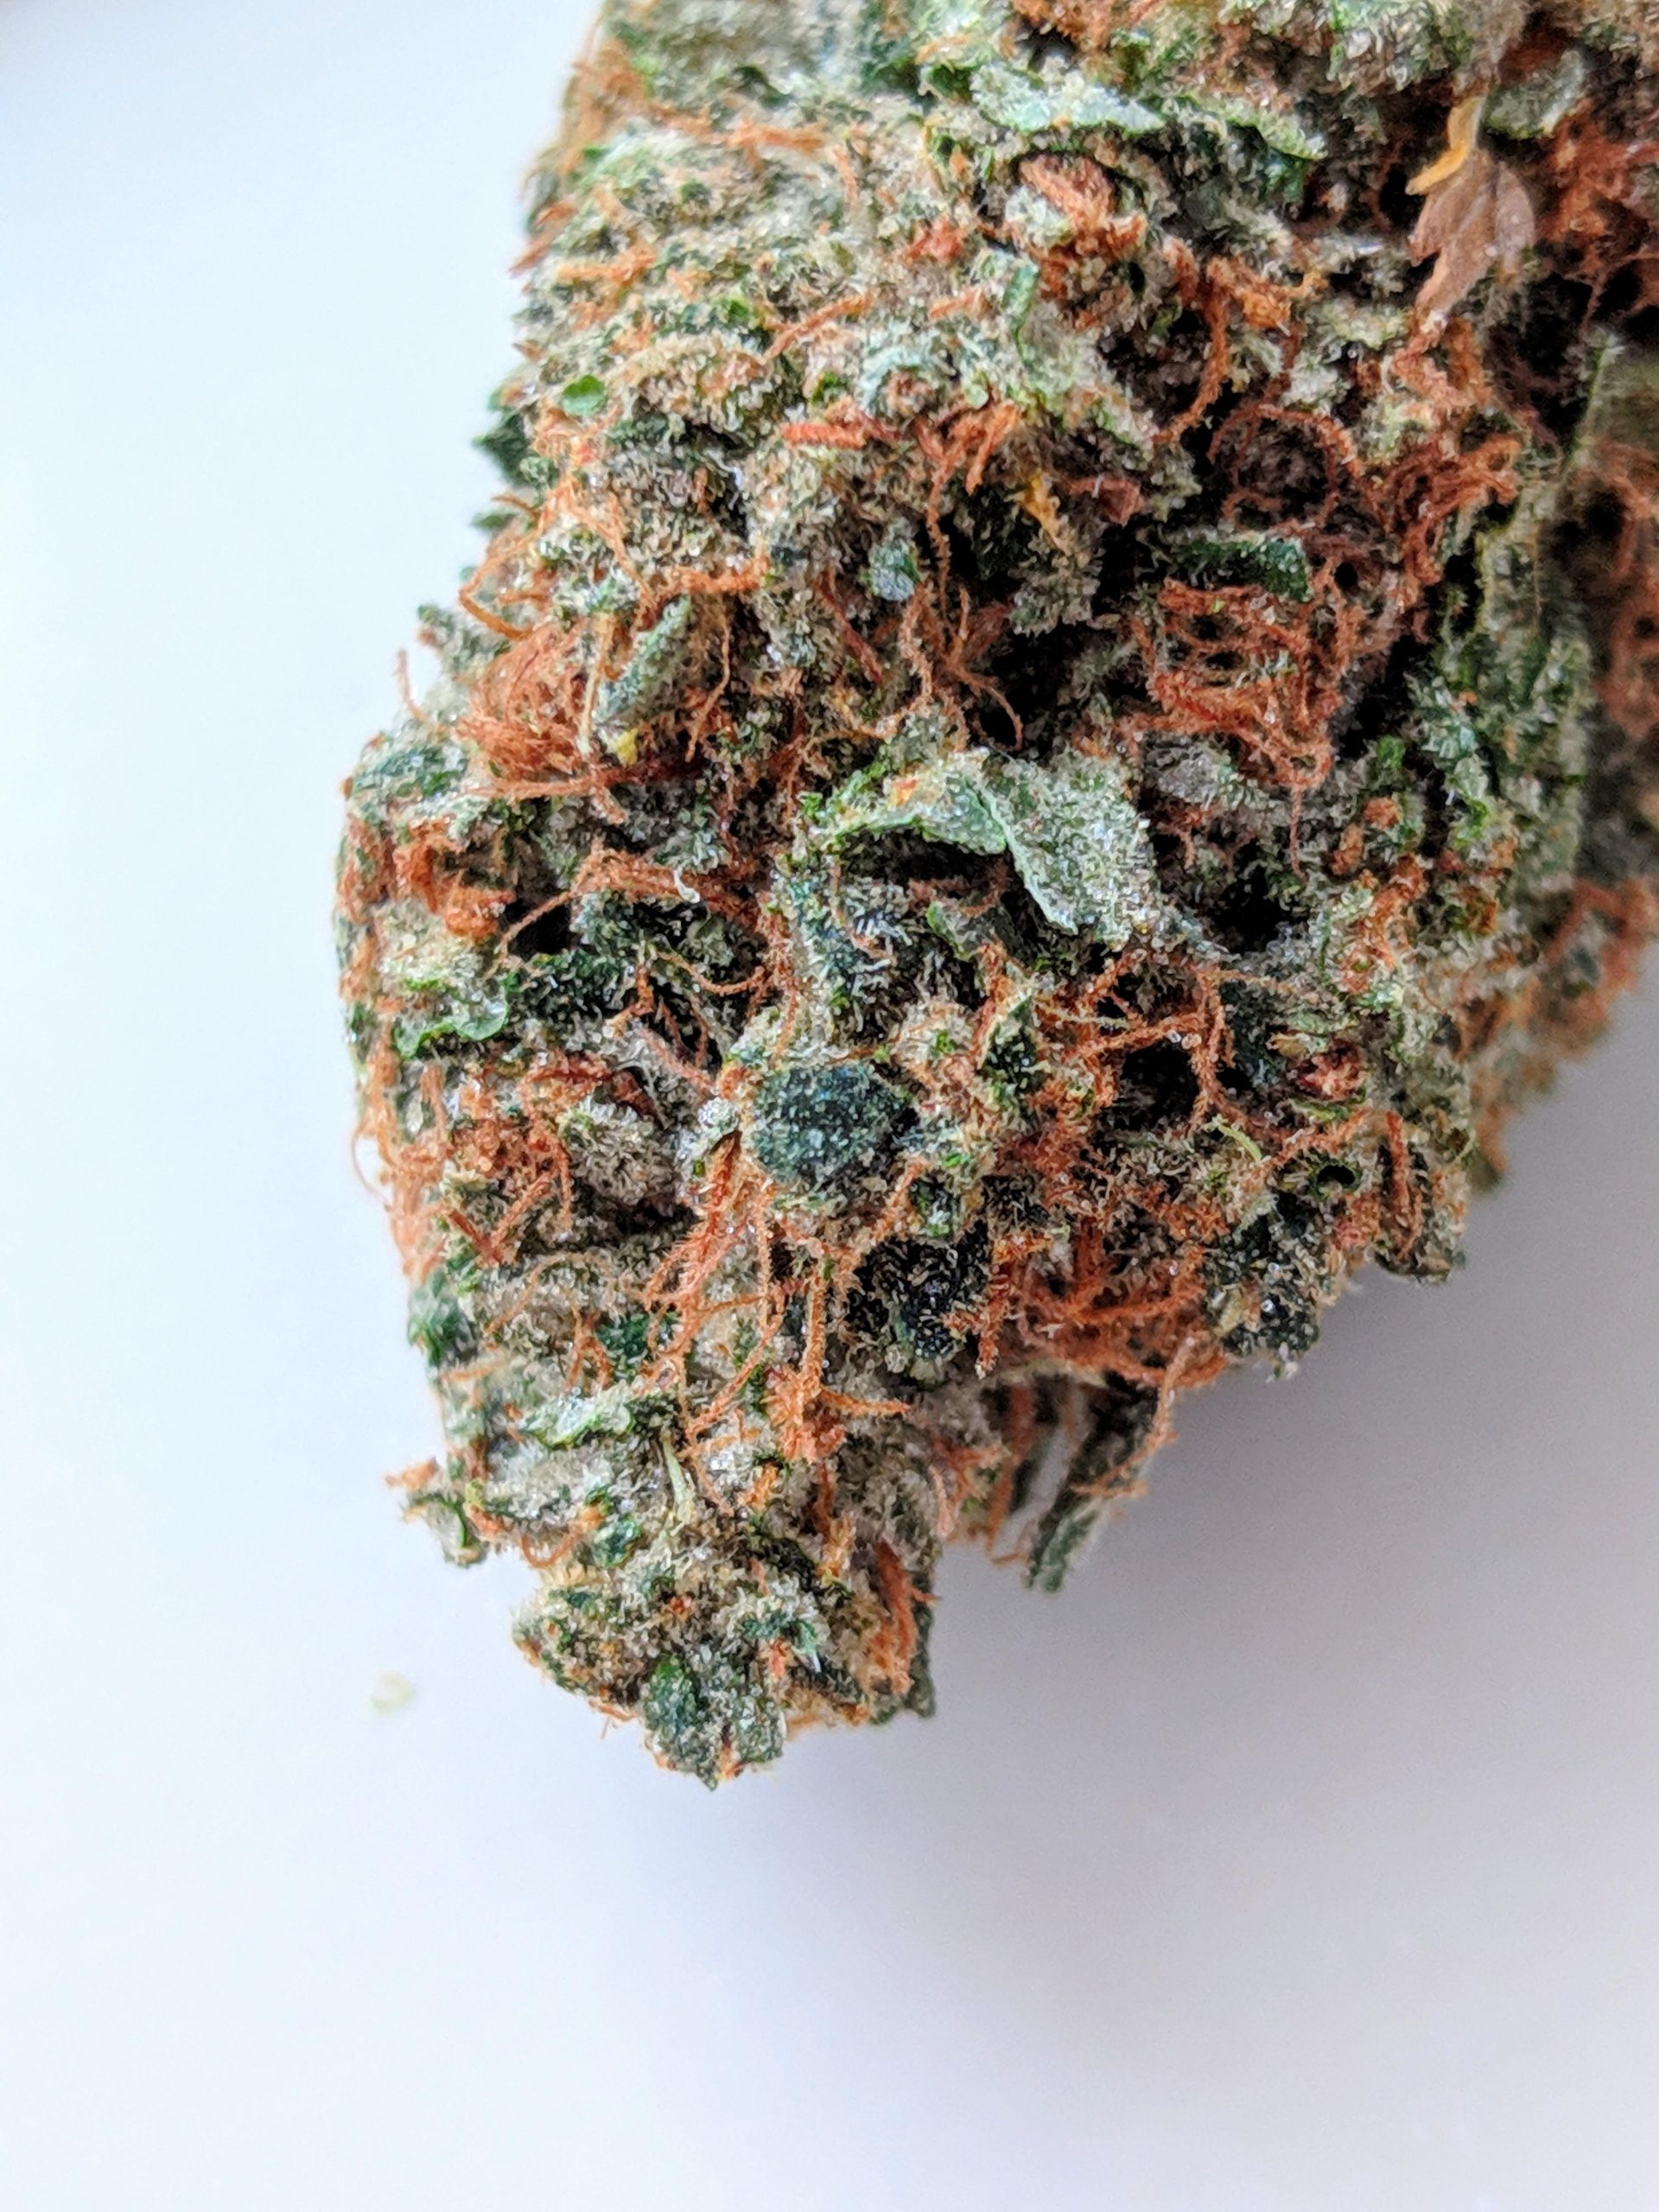 Buy Weed Online allows you to obtain a product of the best quality